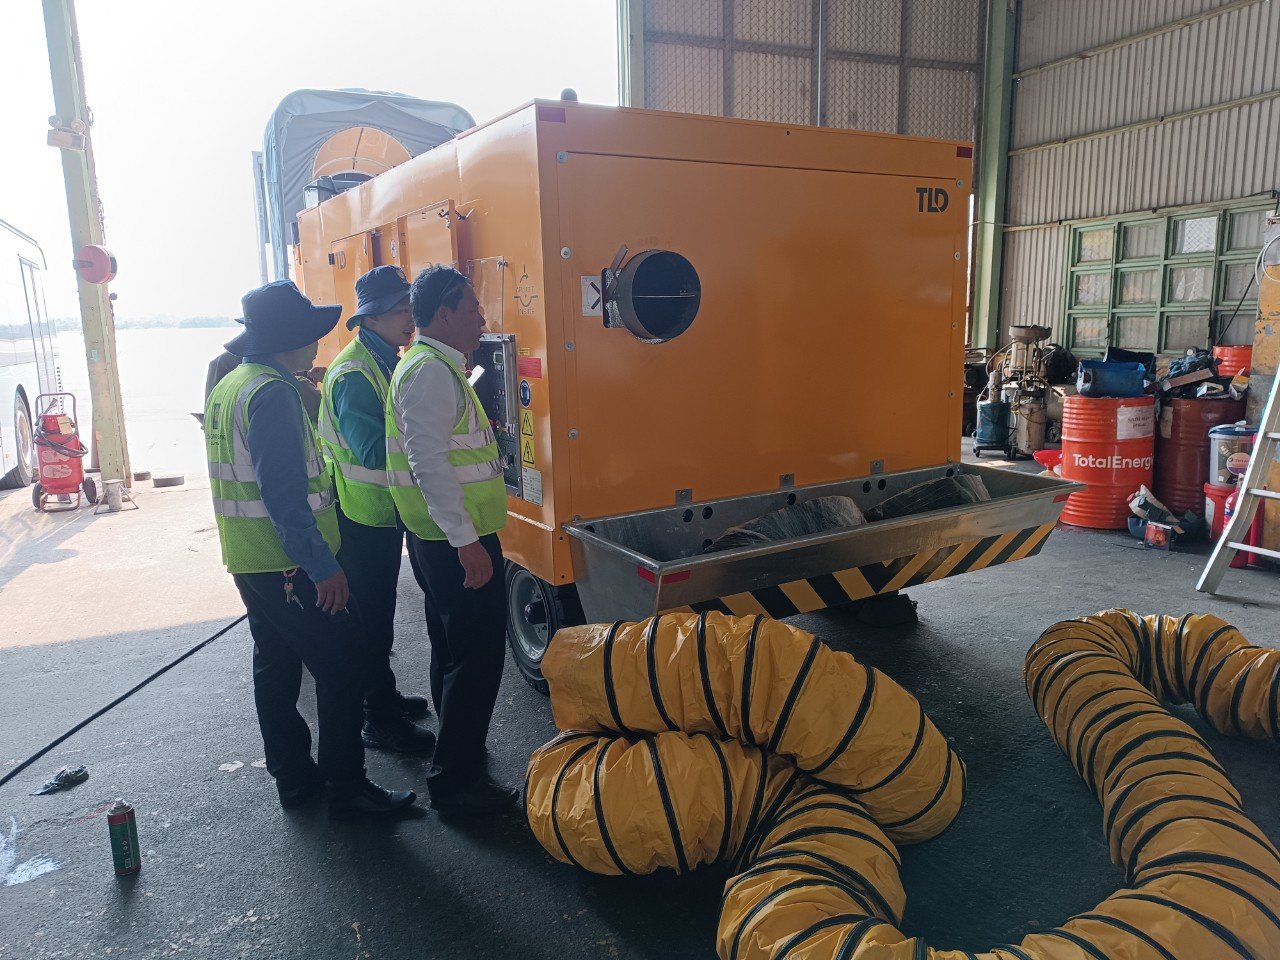 INSPECTION – OPERATING INSTRUCTIONS  FOR TLD’s AIR CONDITIONING  MODEL: ACU – 804 – CUP  FOR CUSTOMER: SAI GON GROUND SERVICES JSC (SAGS) – DA NANG INTERNATIONAL AIRPORT